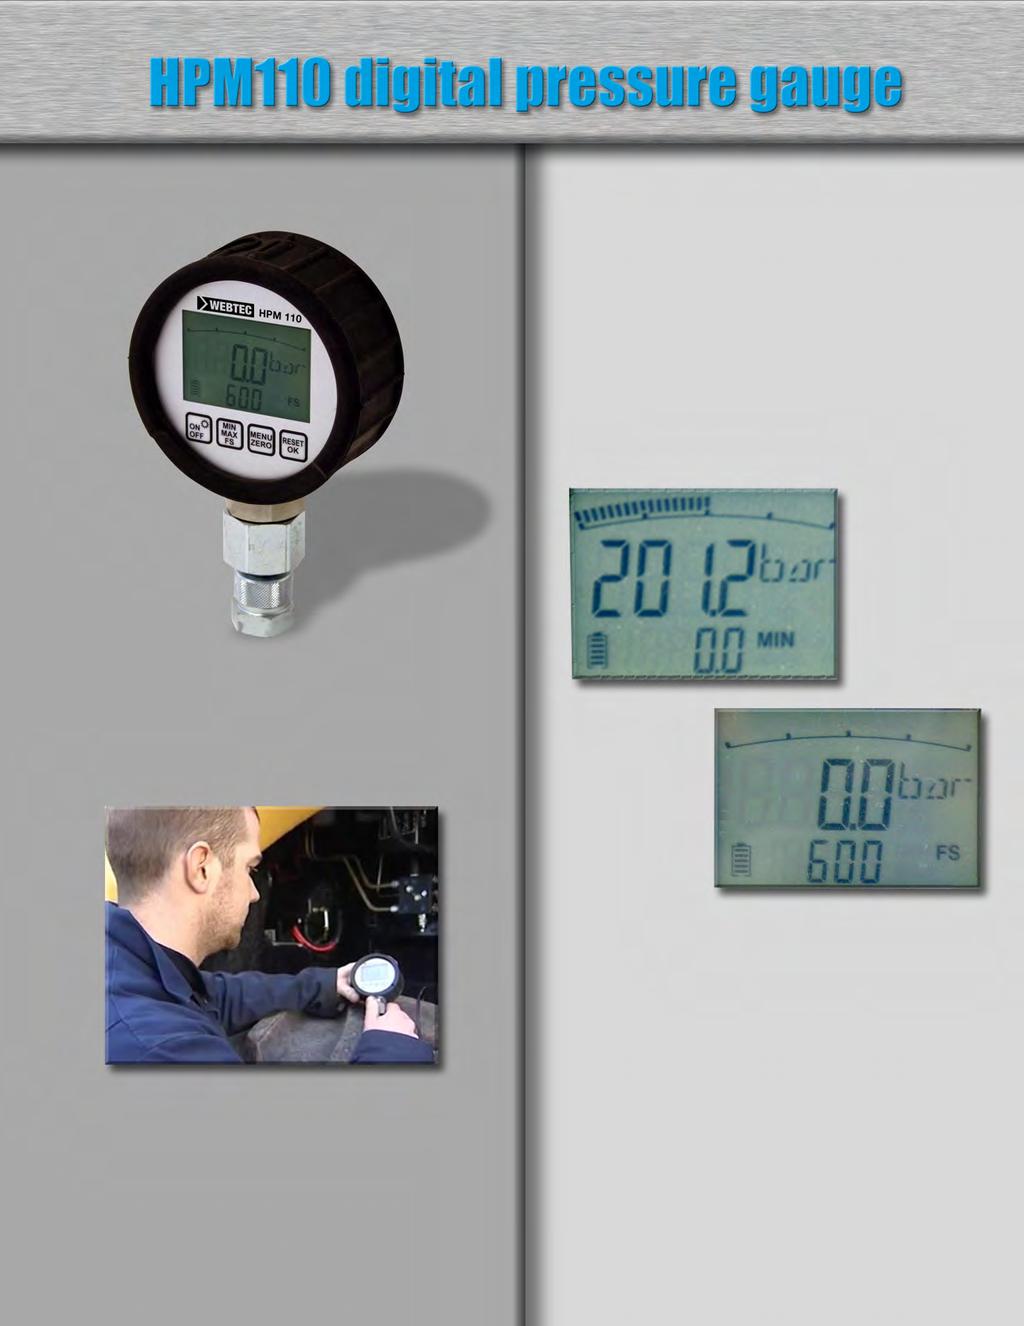 The HPM110 offers an economical solution to monitoring pressure and peak pressure with a simple visual display.